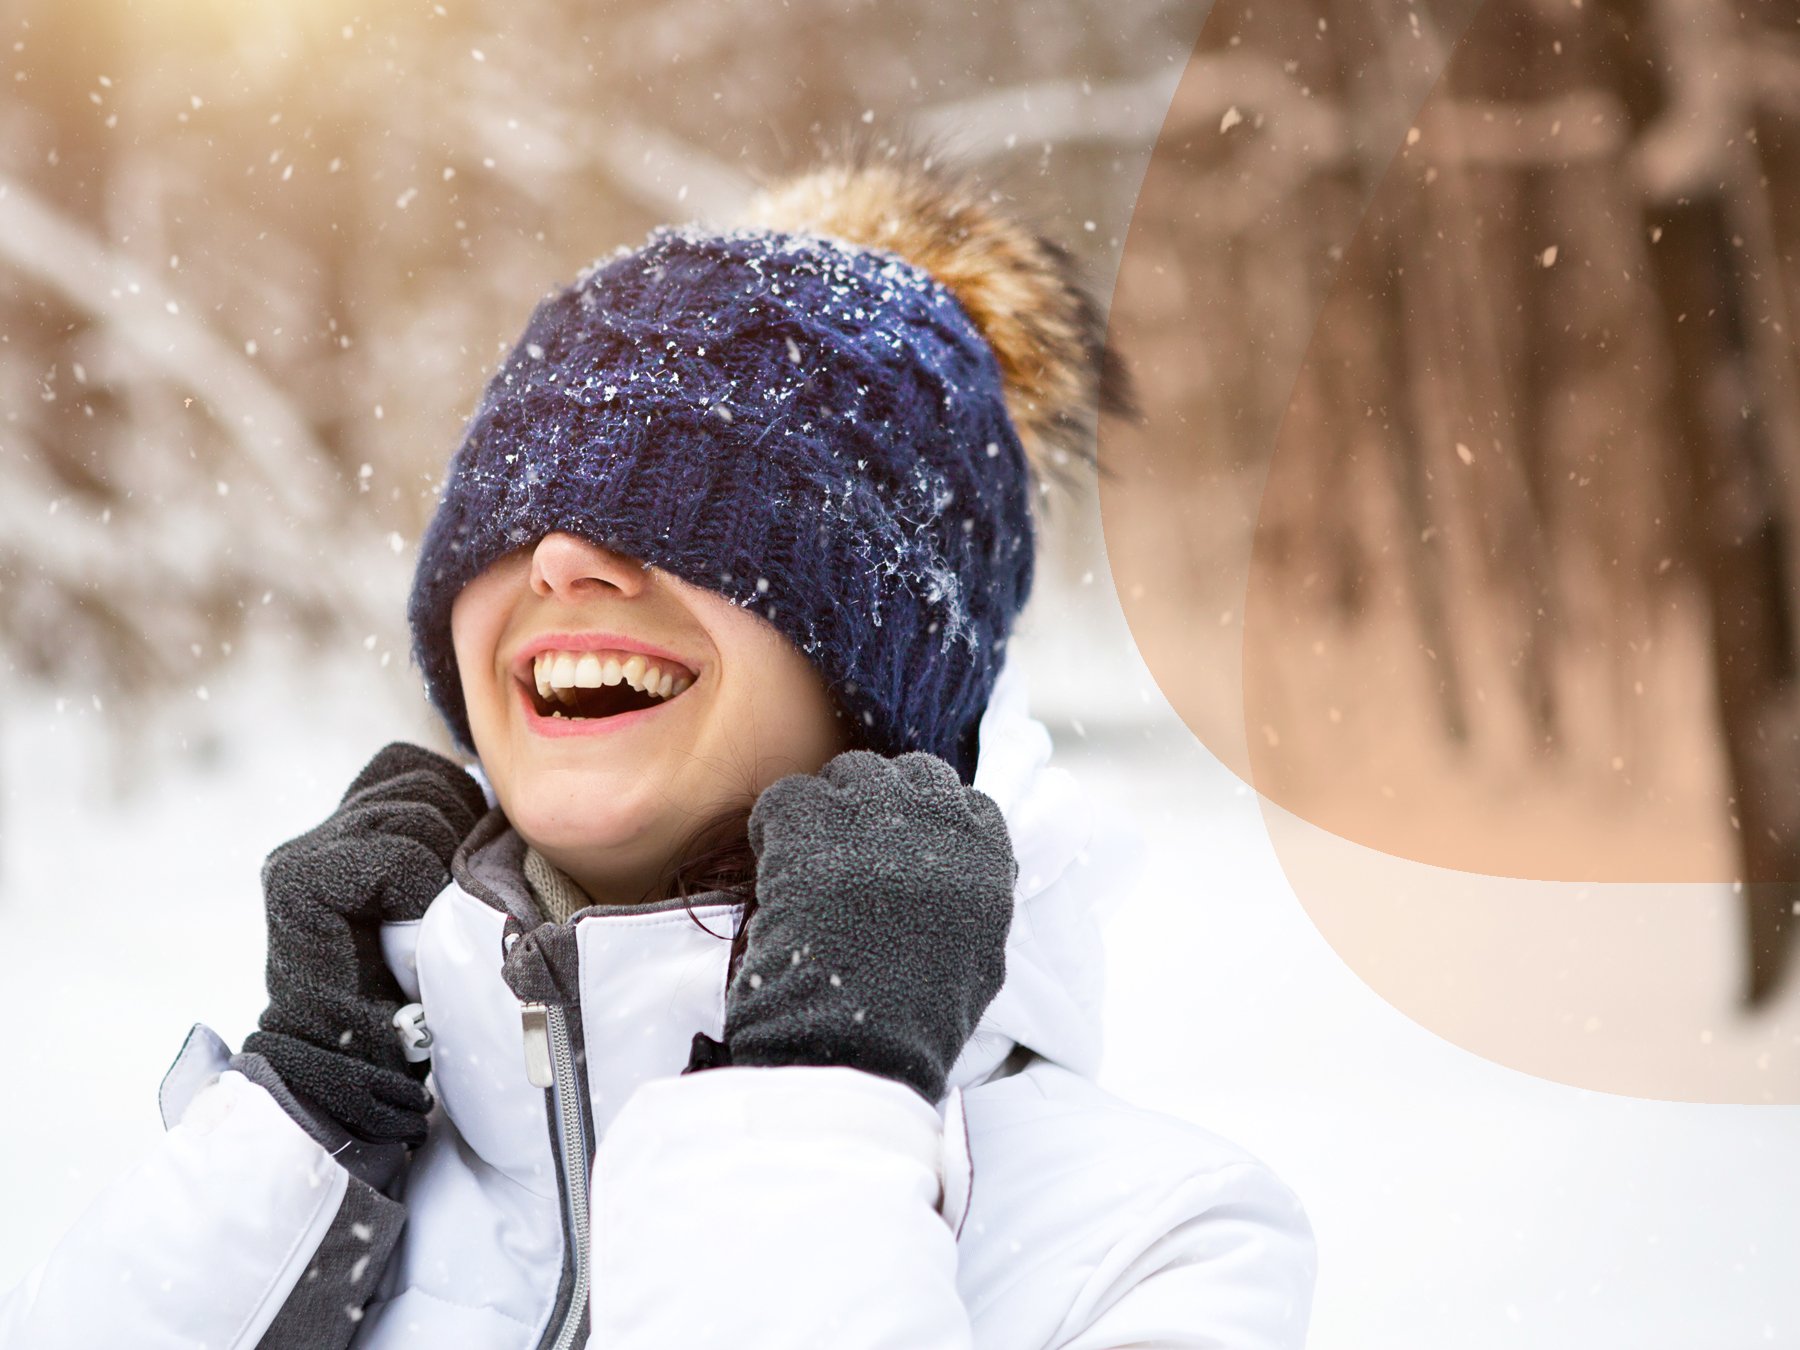 Close-up of a smiling woman with a knitted hat pulled over her eyes, enjoying the snow in the spring sun.